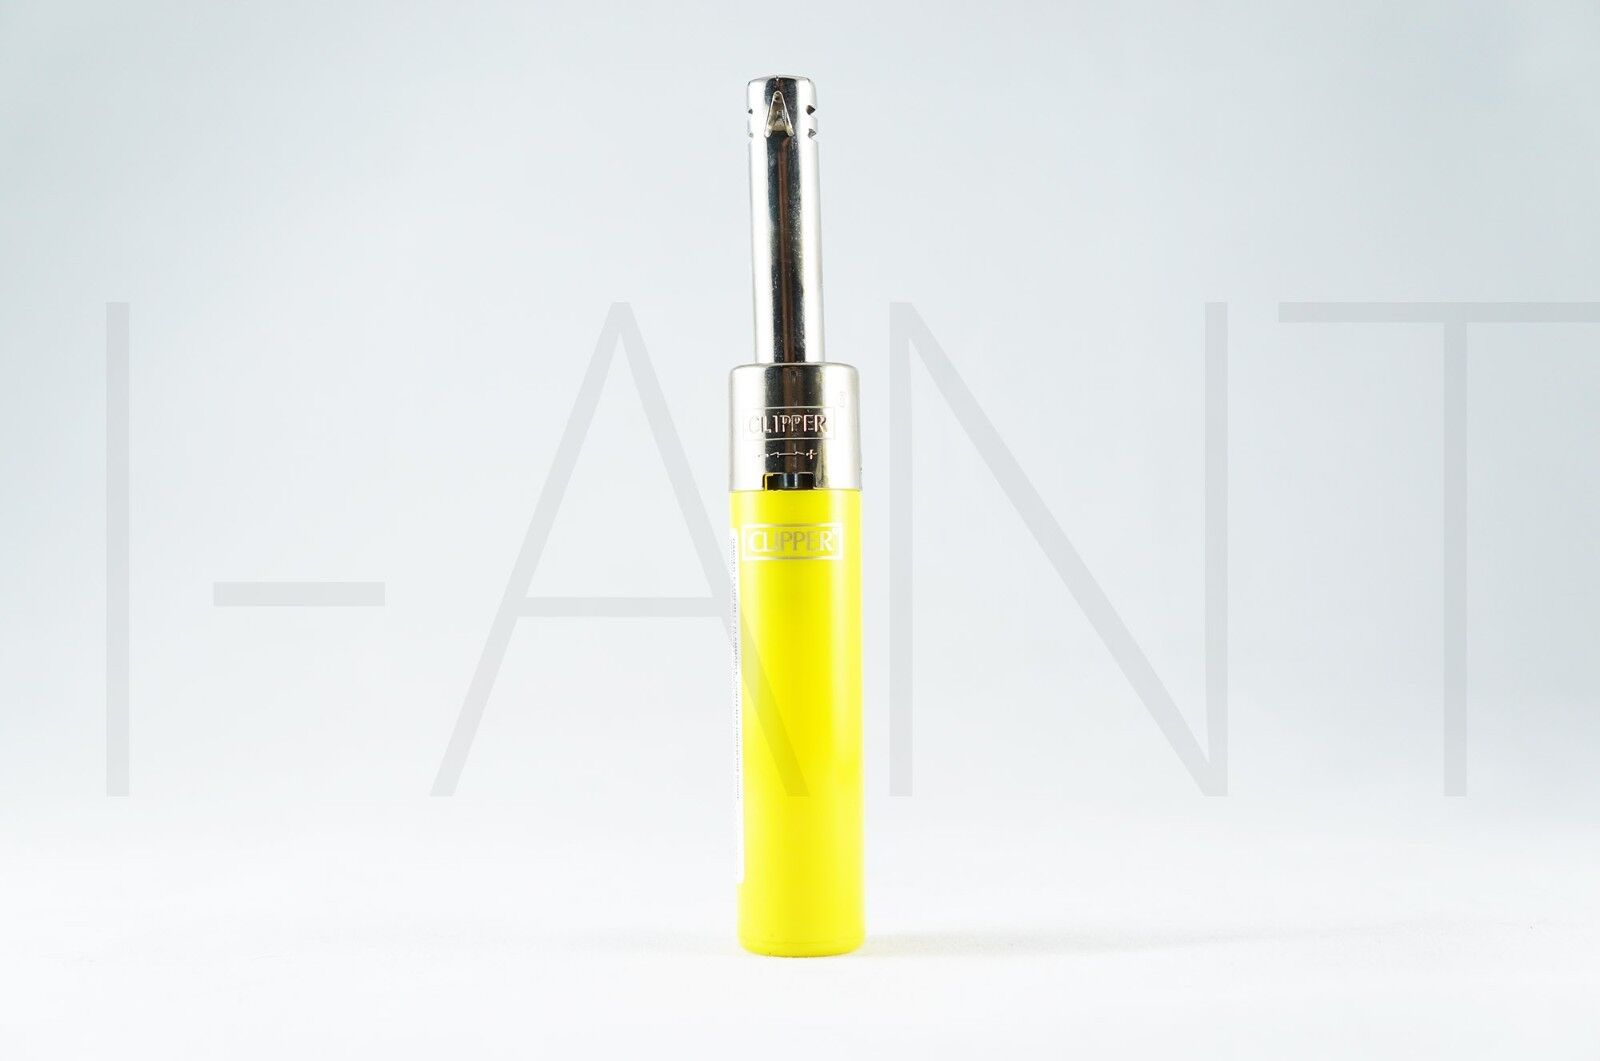 CLIPPER FULL-SIZE TUBE PIEZO IGNITION REFILLABLE ADJUSTABLE FLAME LIGHTER Без бренда